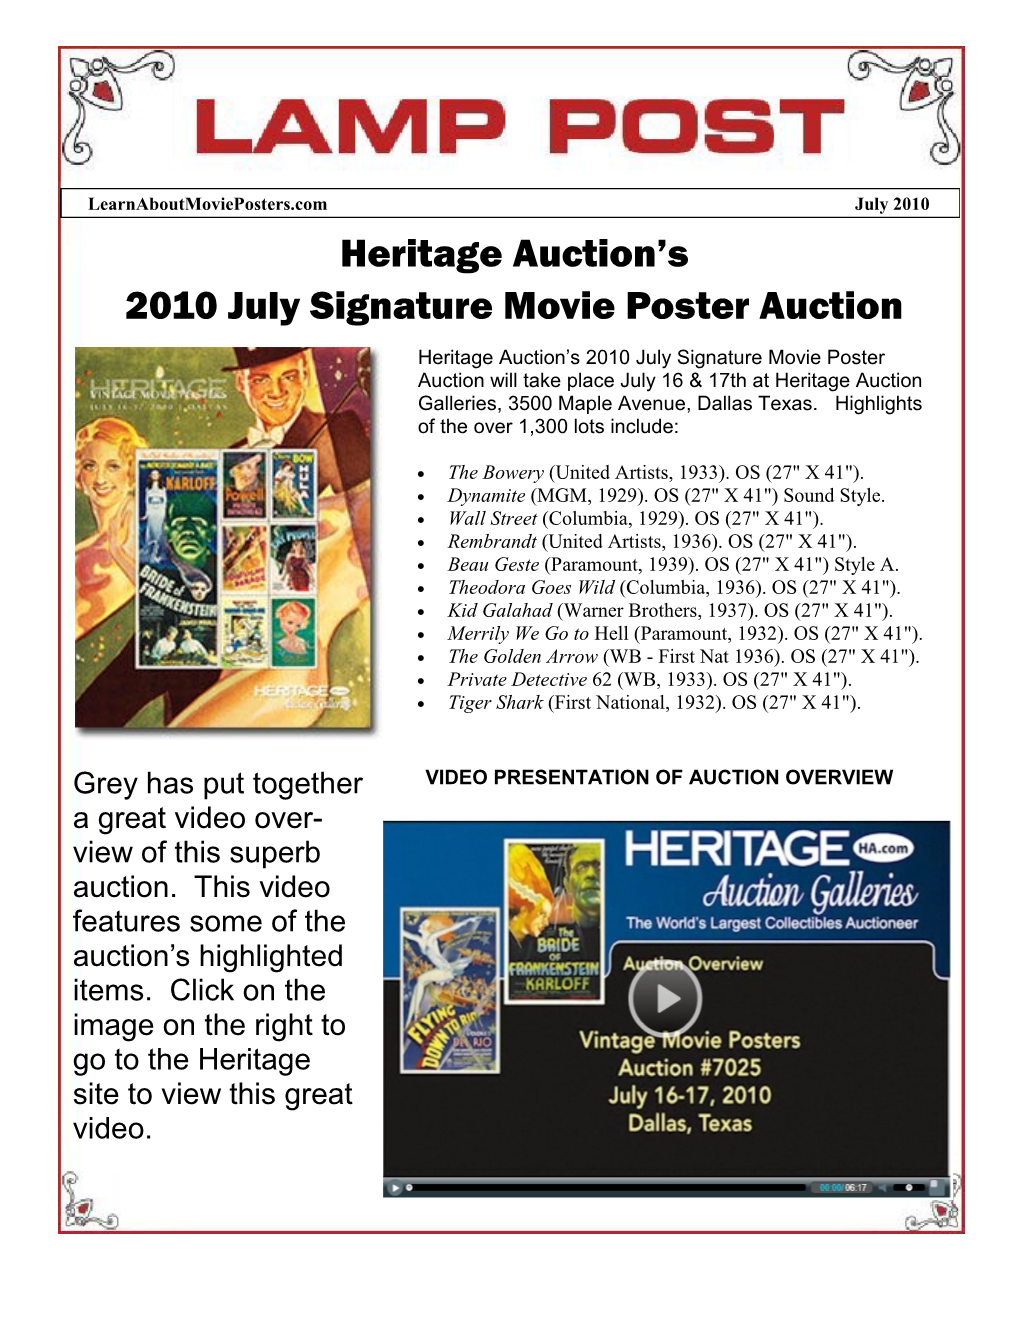 Heritage Auction's 2010 July Signature Movie Poster Auction